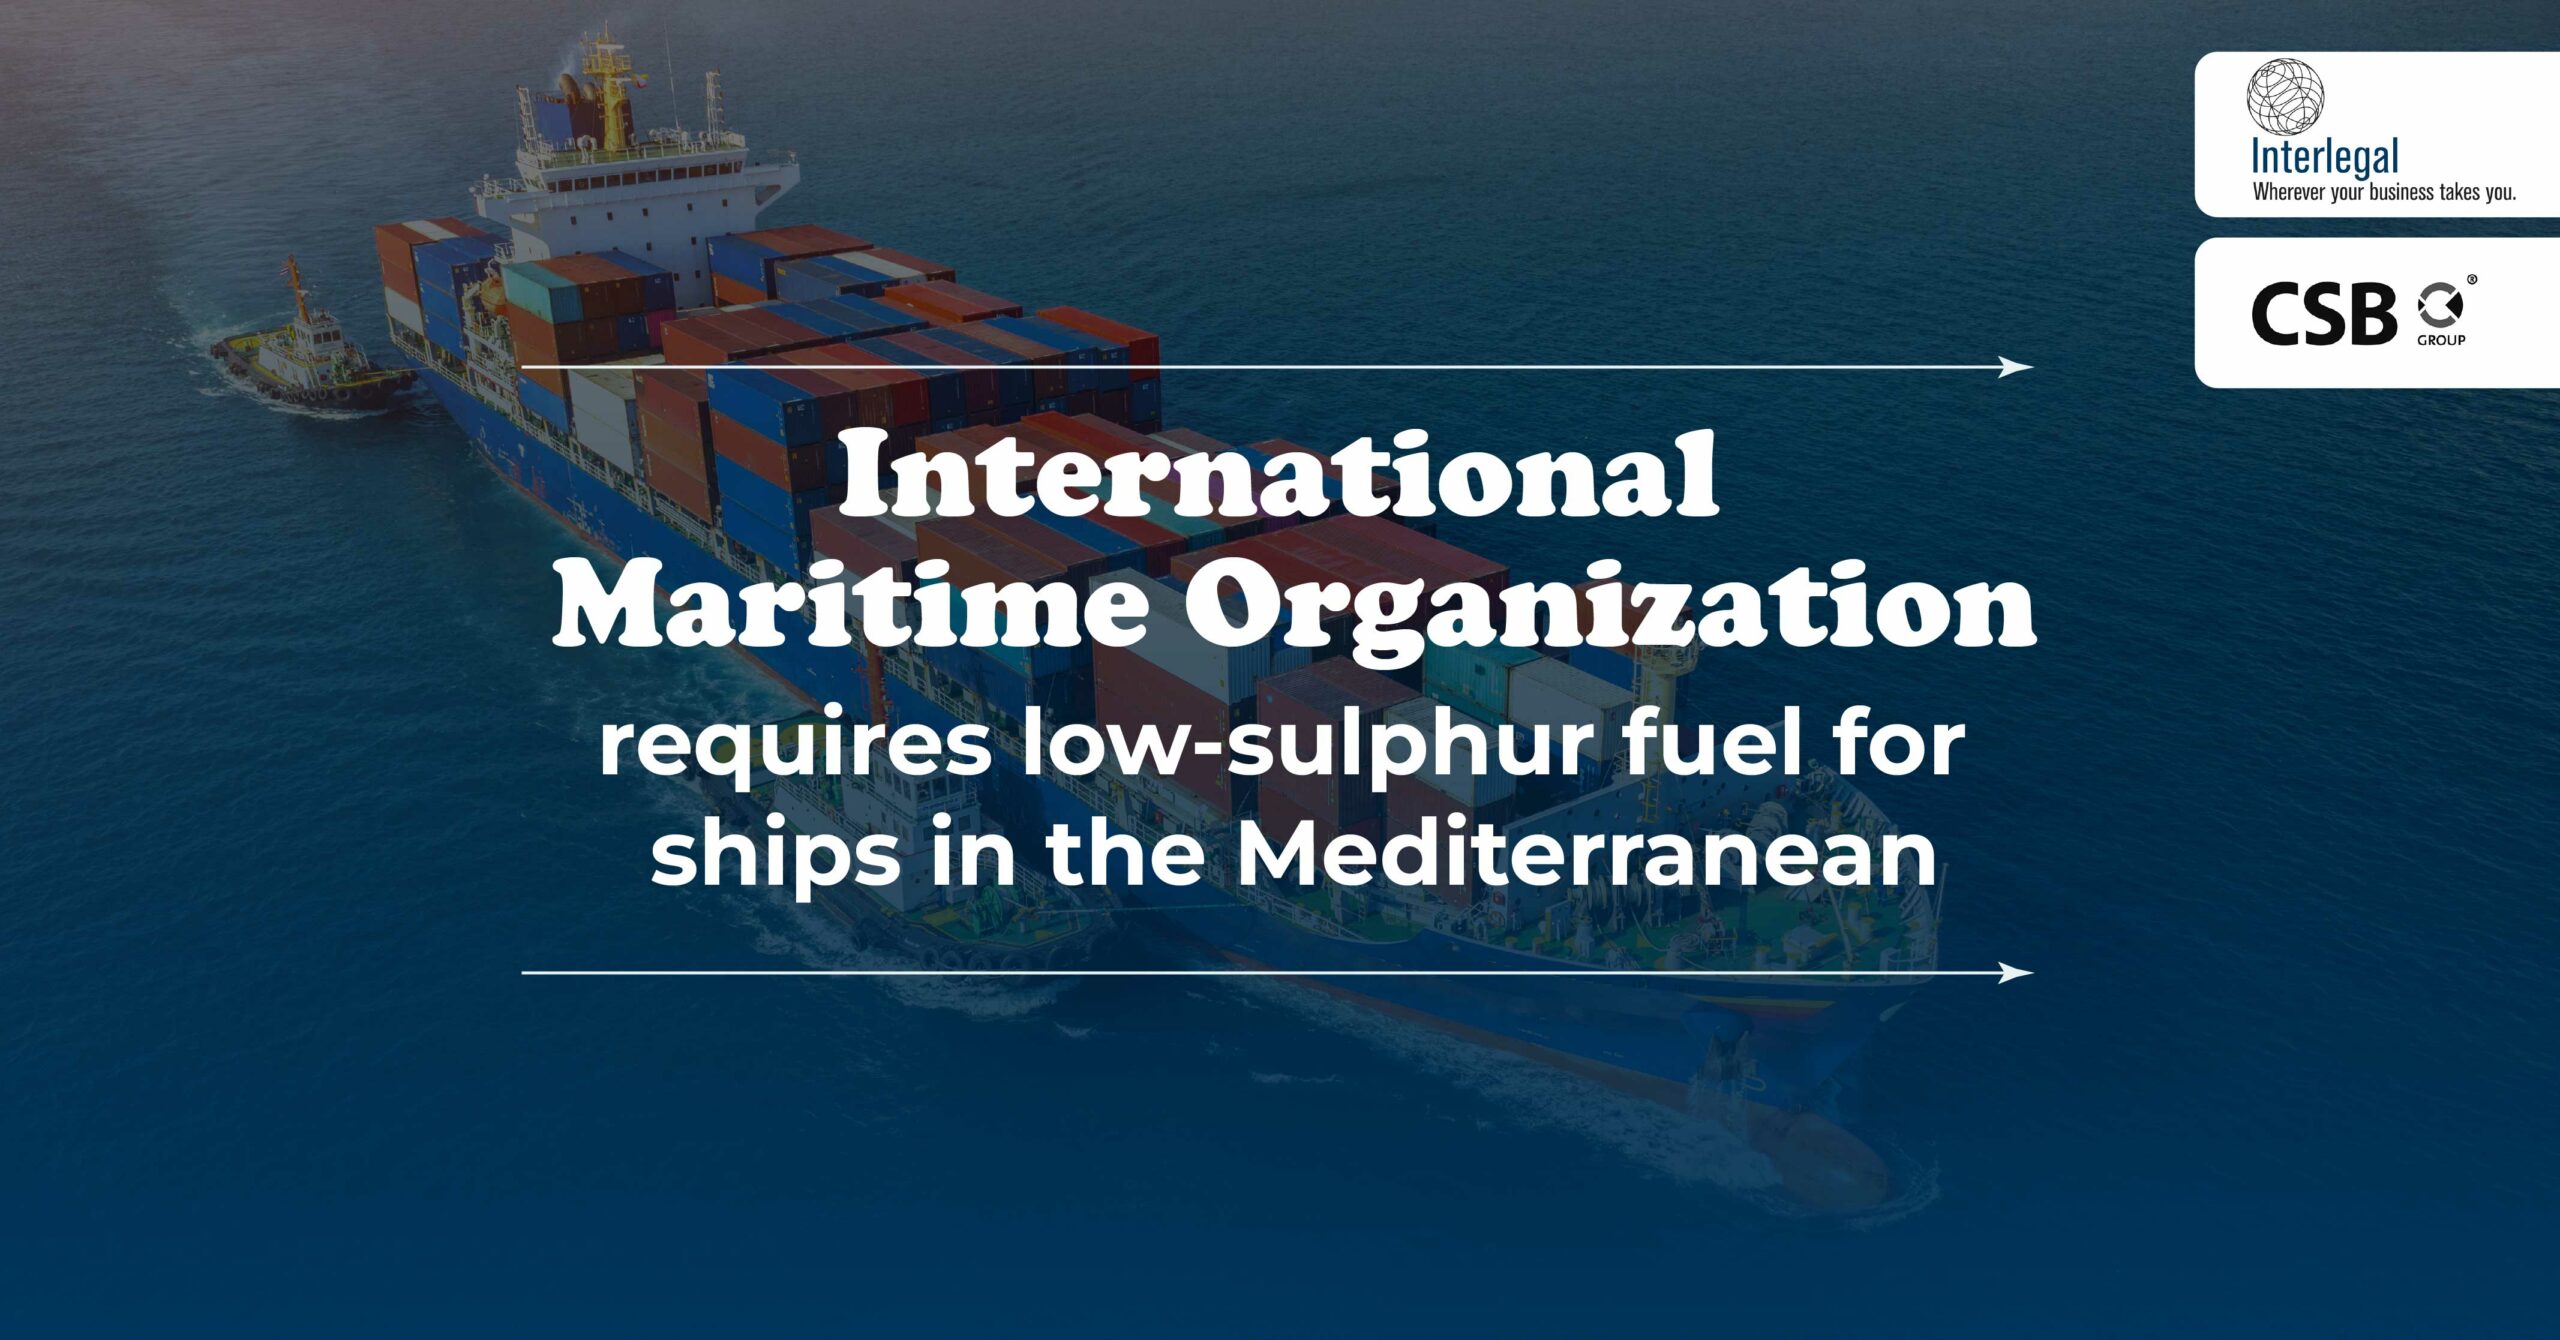 International Maritime Organization requires ships to use fuel with less sulphur content when in the Mediterranean Sea